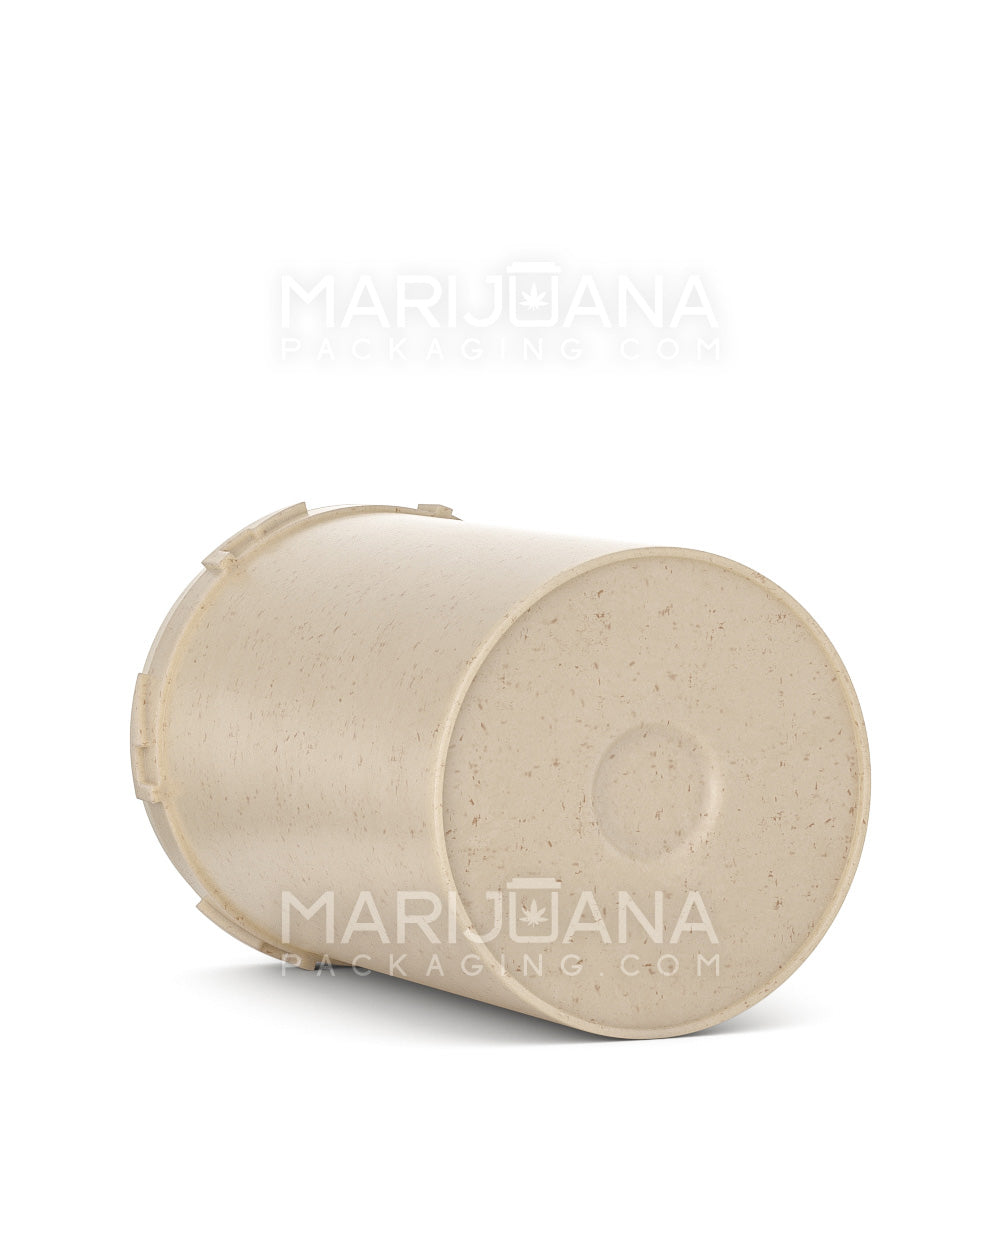 Child Resistant & Sustainable | 100% Biodegradable Hemp Push & Turn Vial | 34dr - 7g - 250 Count - 6